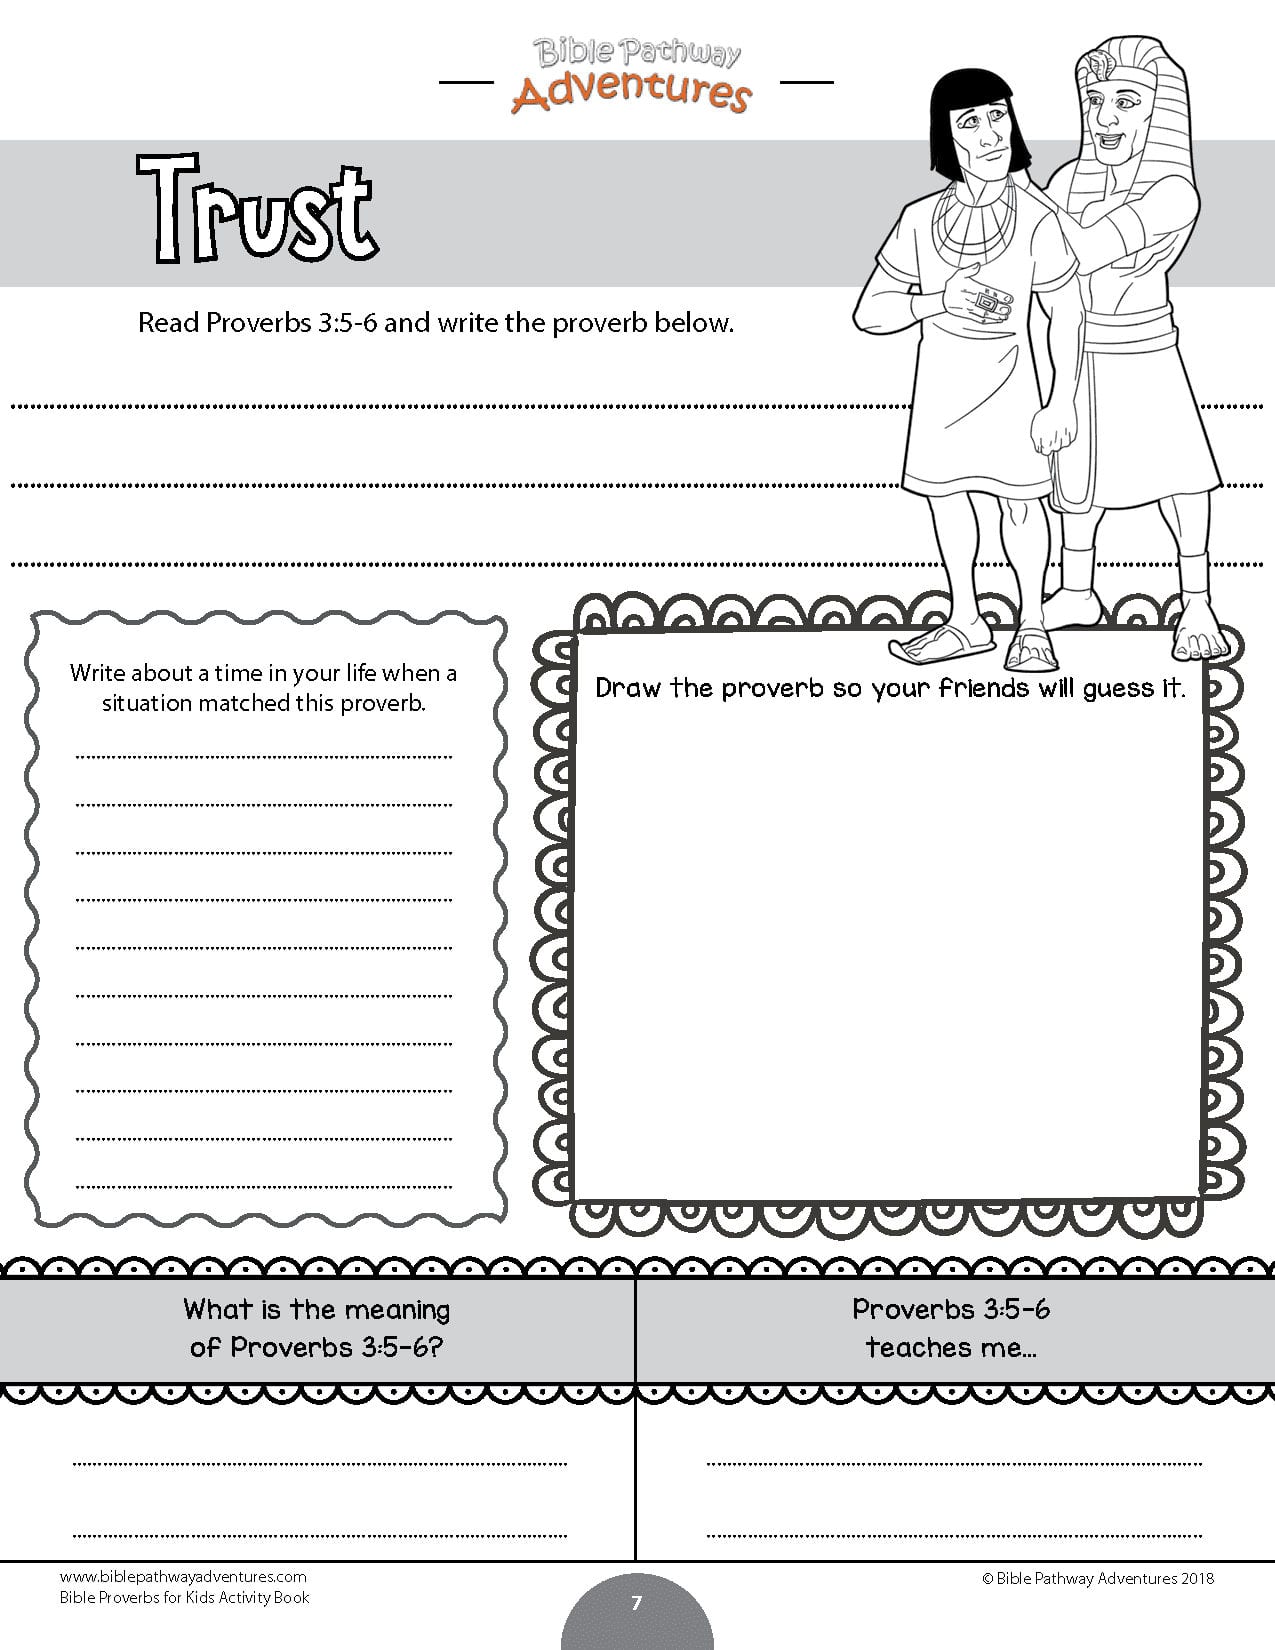 Bible Proverbs For Kids Coloring Activity Book – Bible